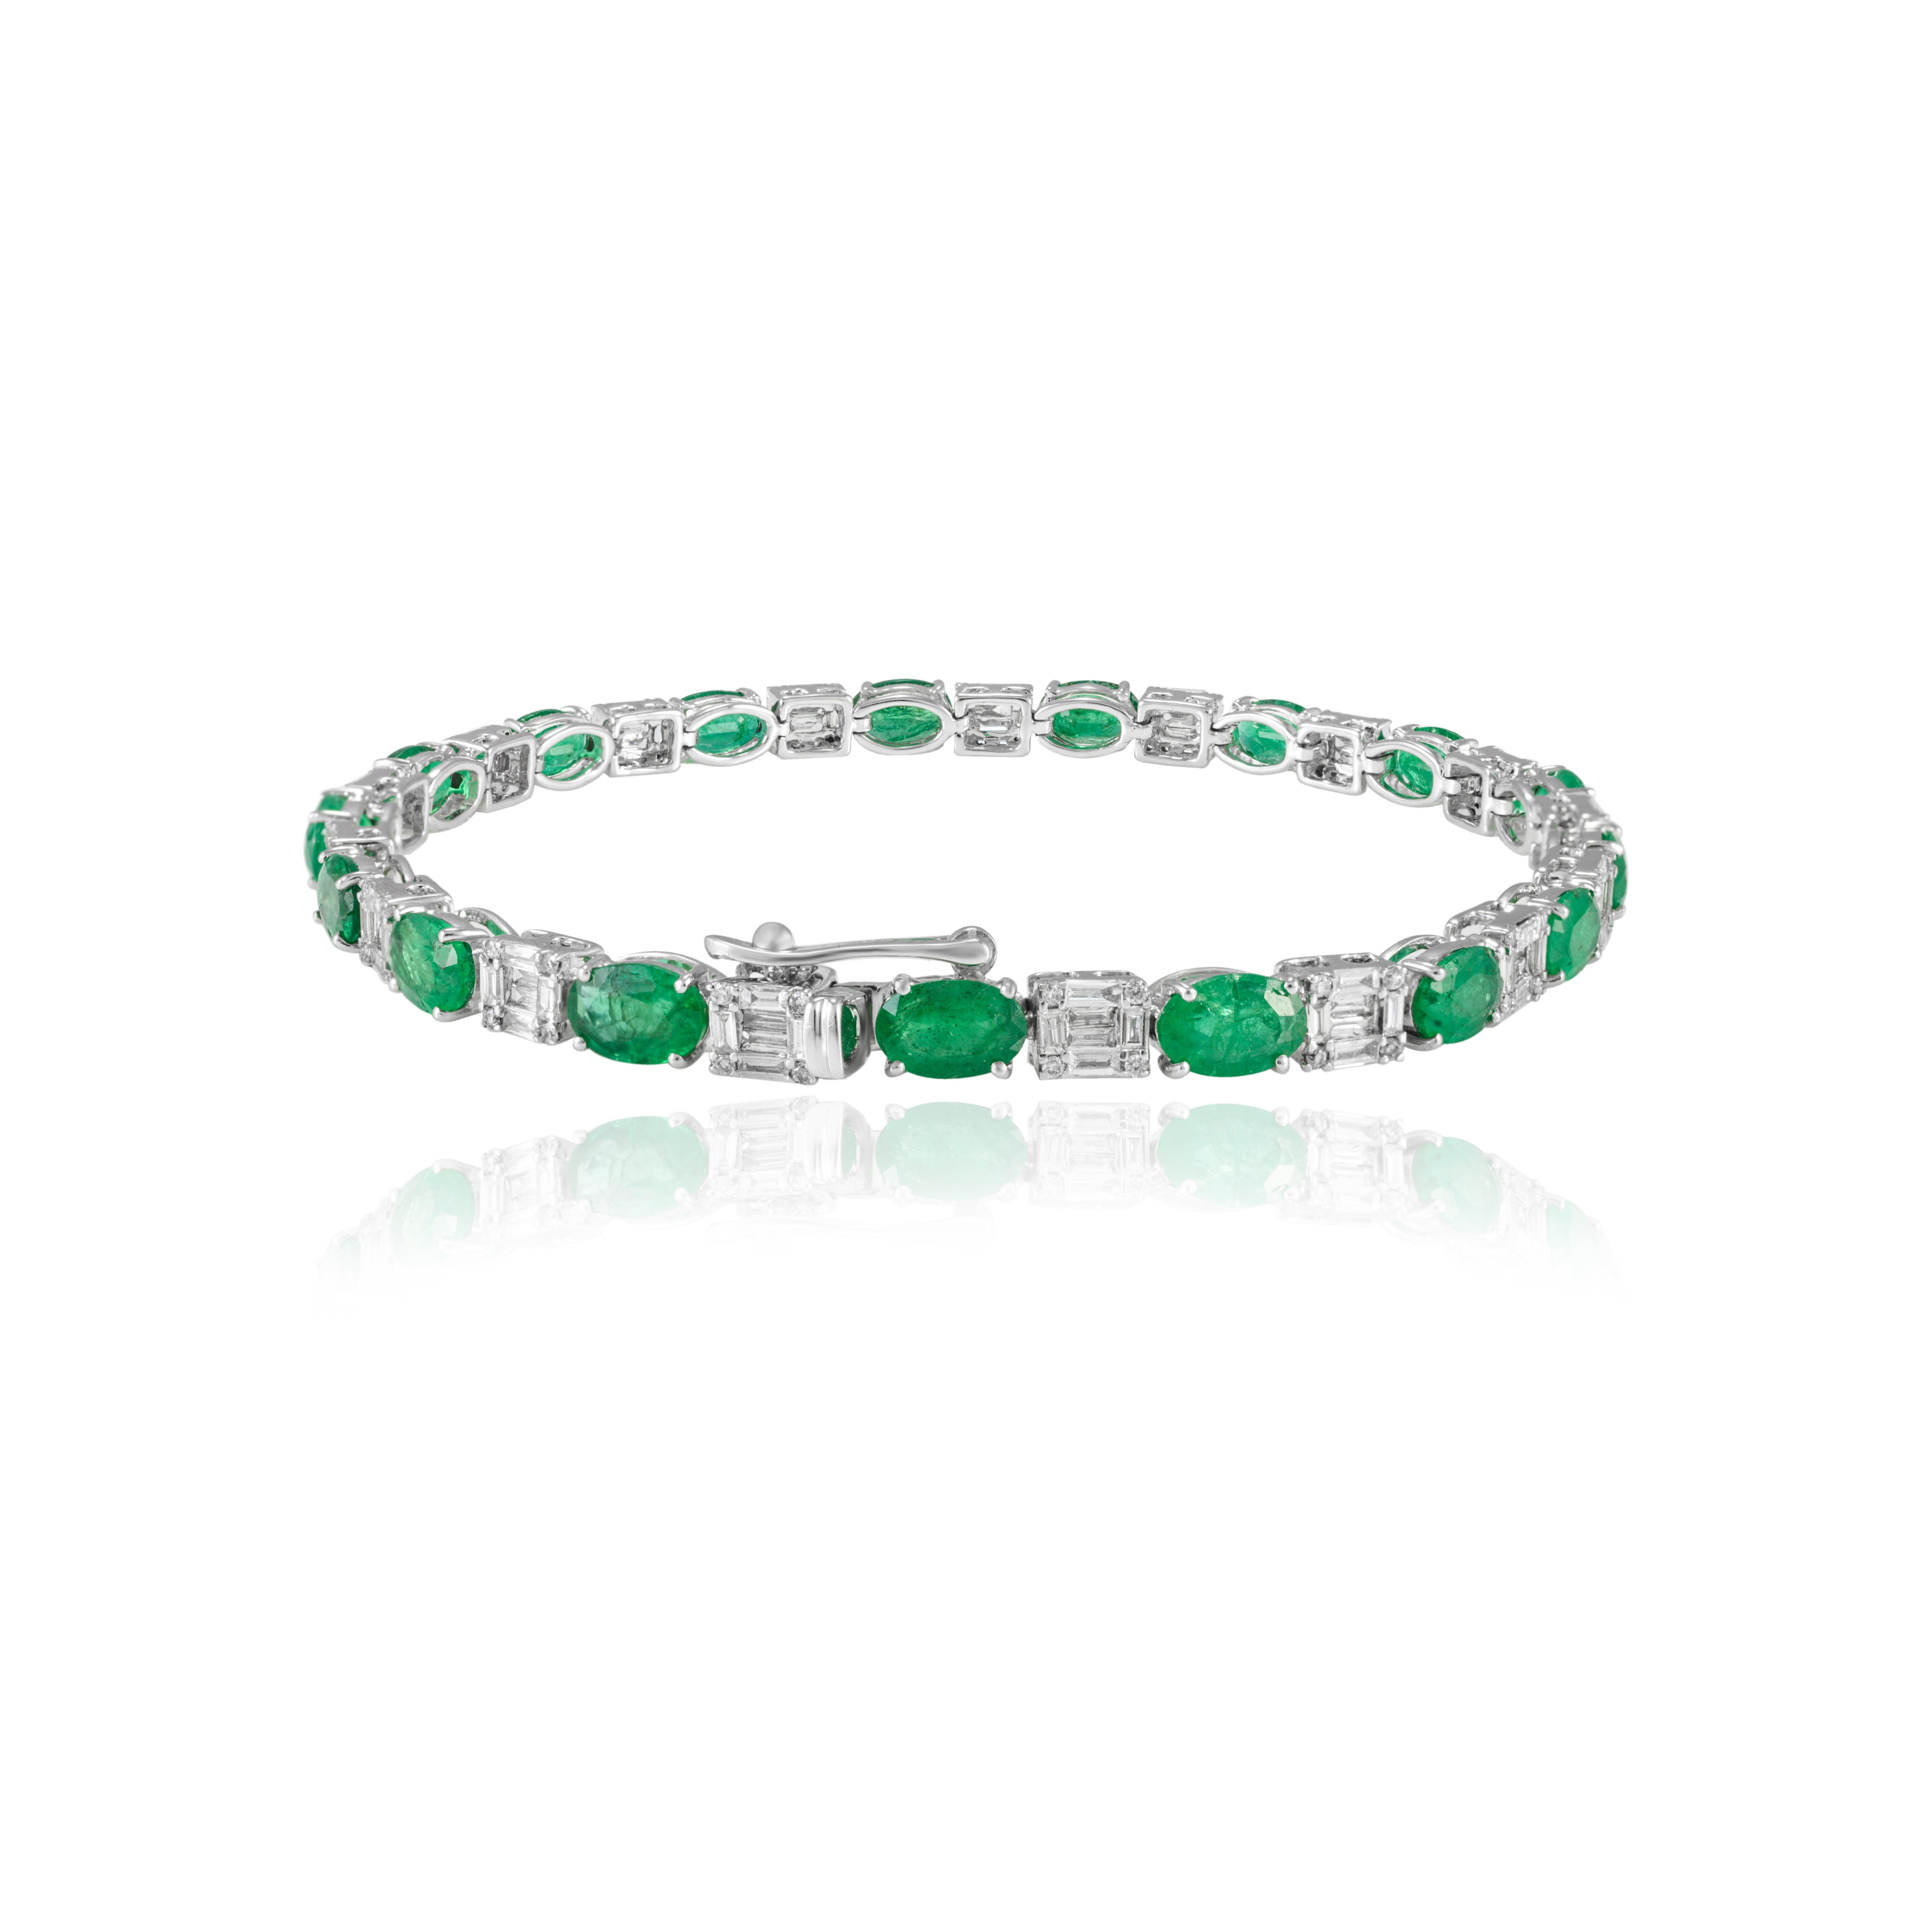 Women's Solid 18k White Gold 6.64 Carat Natural Emerald and Diamond Tennis Bracelet For Sale